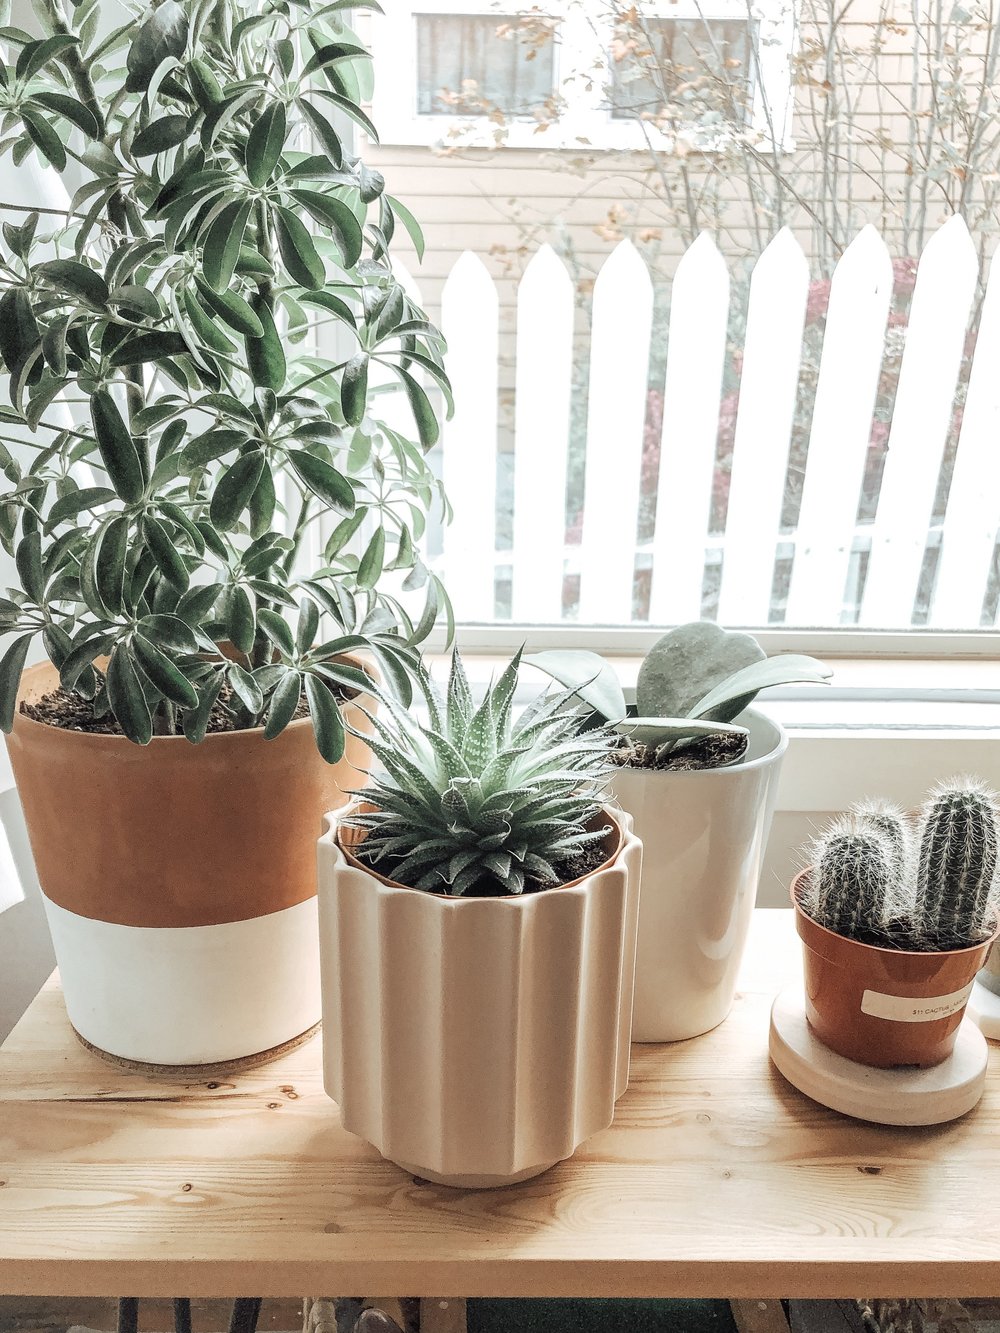  Plant care tips, plant care 101, how to keep plants alive, house plants, home decor, home inspiration 